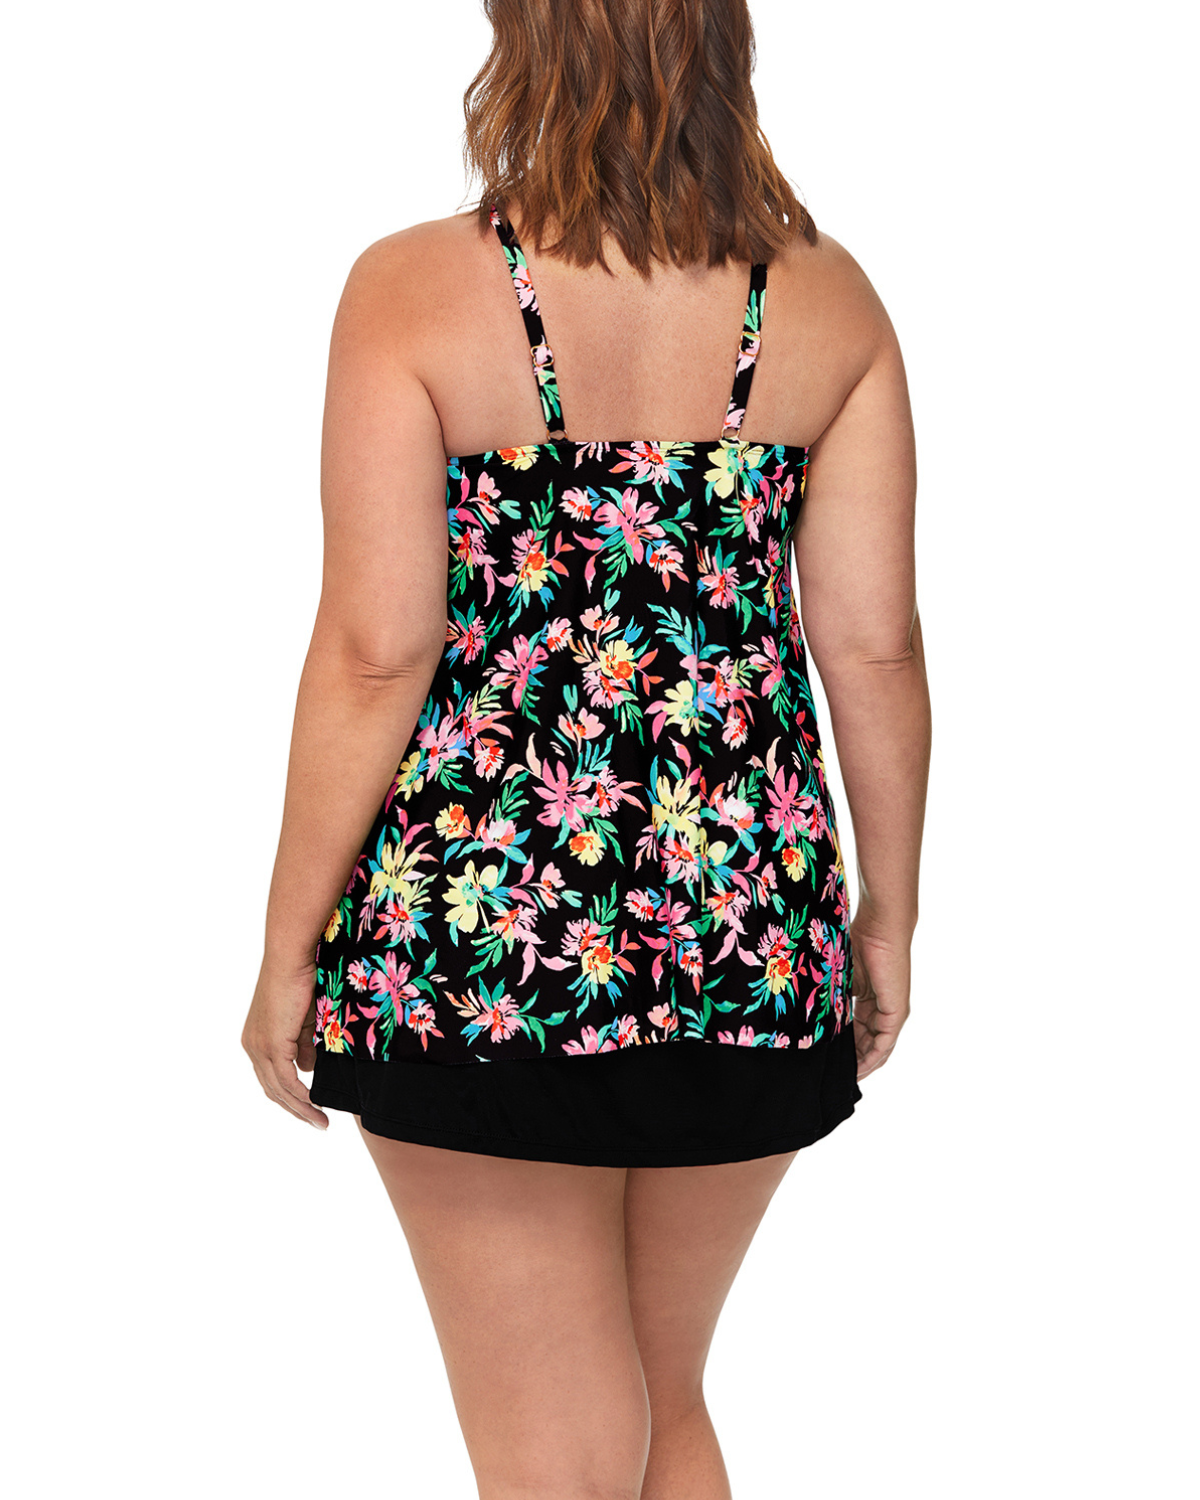 Model wearing a plus tankini top with underwire with a black base and floral print